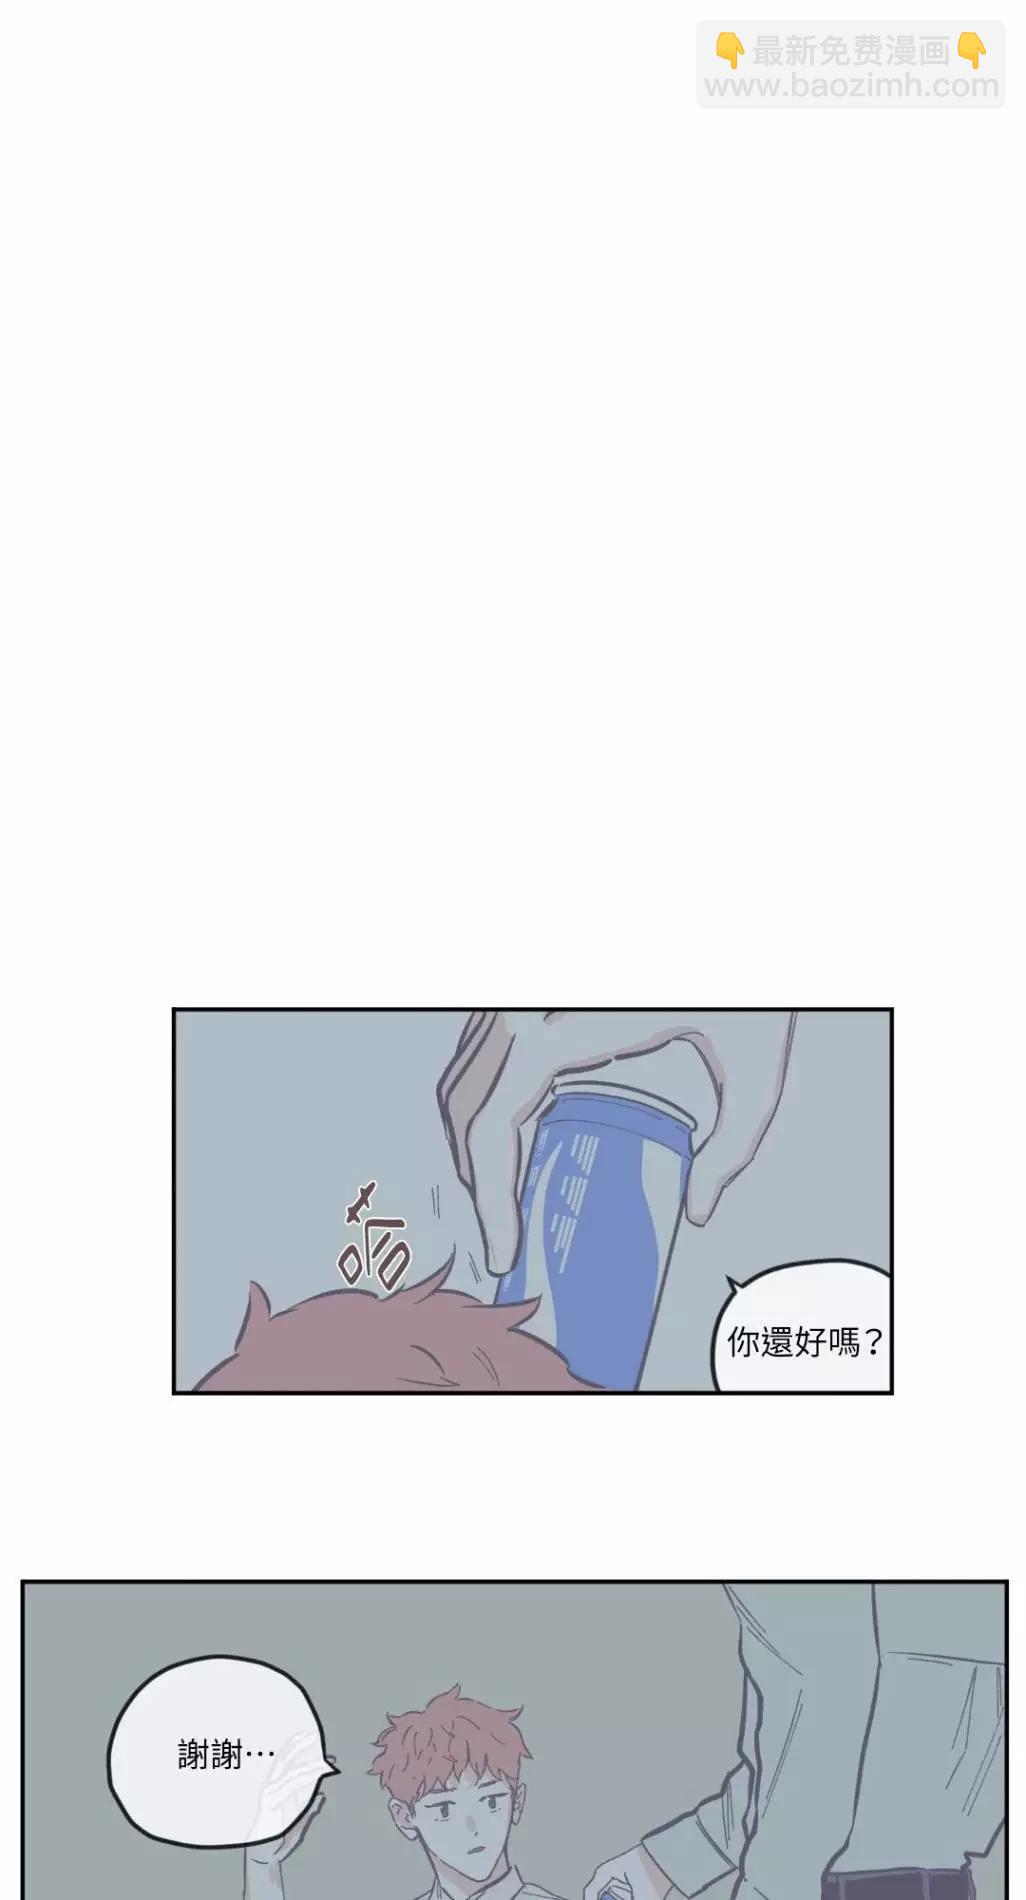 Clean Up百分百 - 第66话 - 3